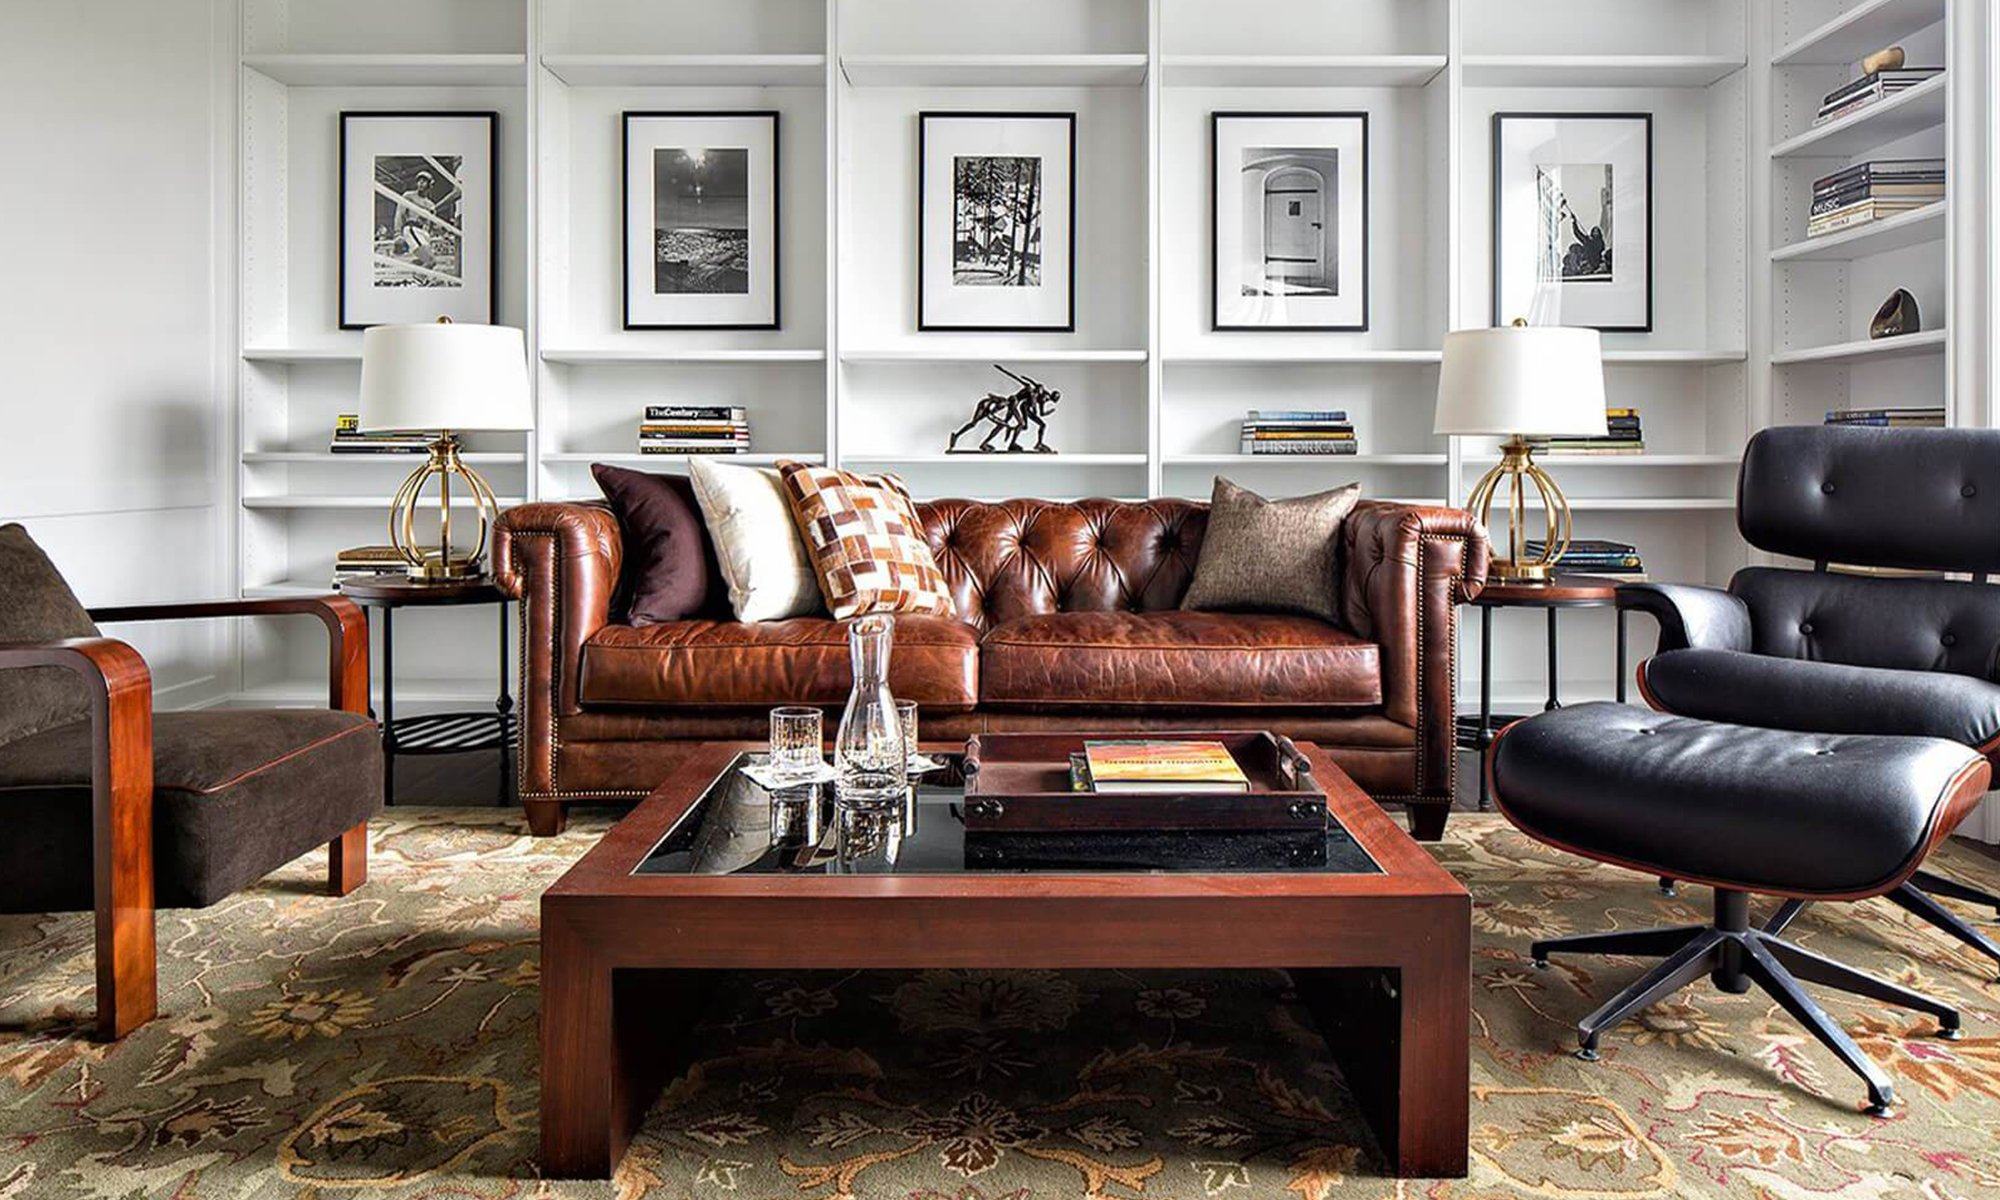 How to mix old and new genuine leather couches